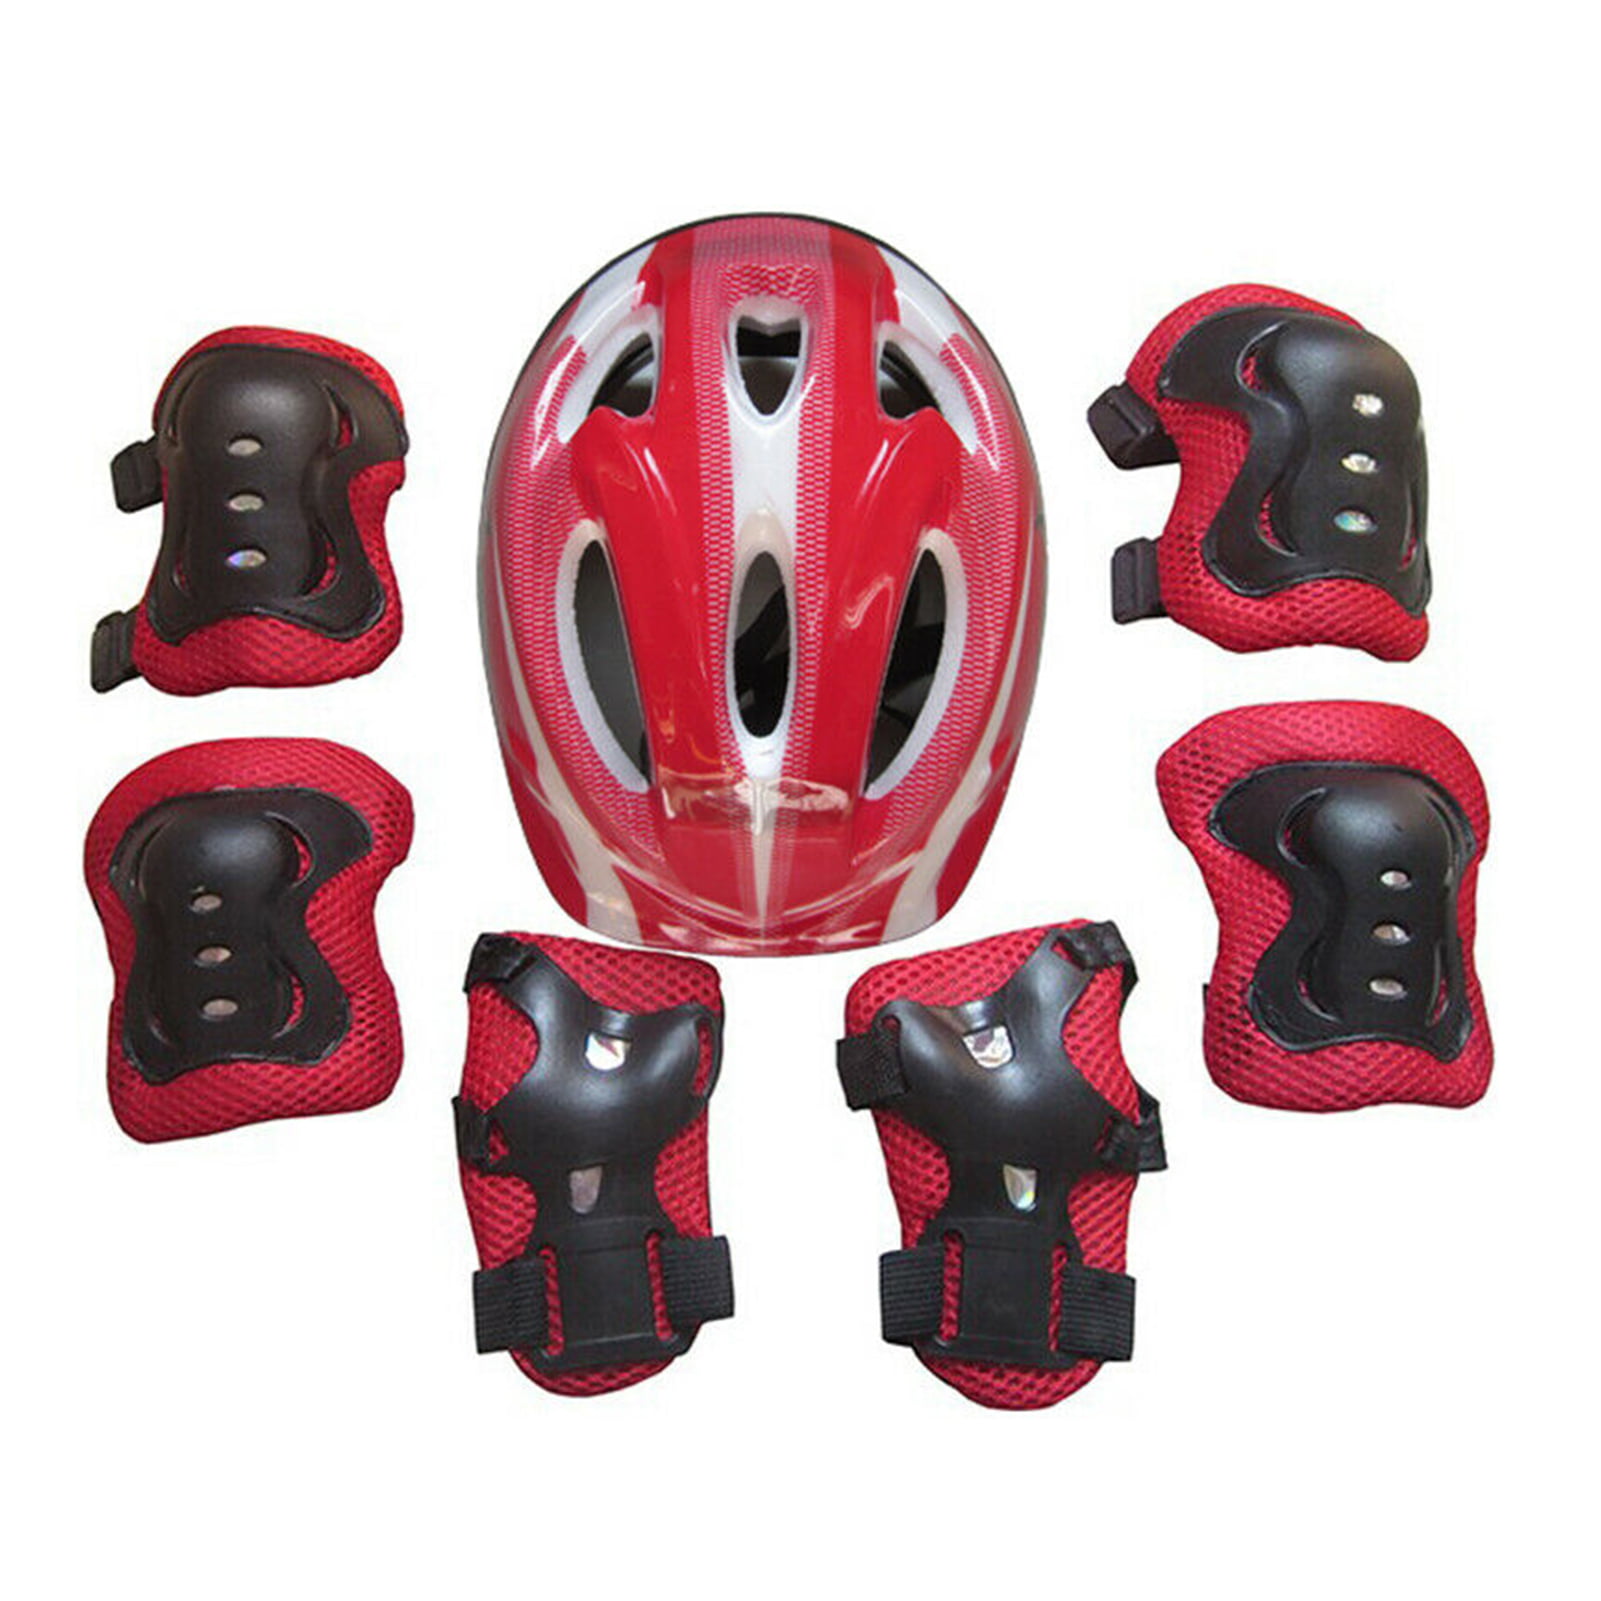 Details about   7pcs Kids Knee Elbow Head Protective Pads Wrist Guard Helmet For Roller Skating 